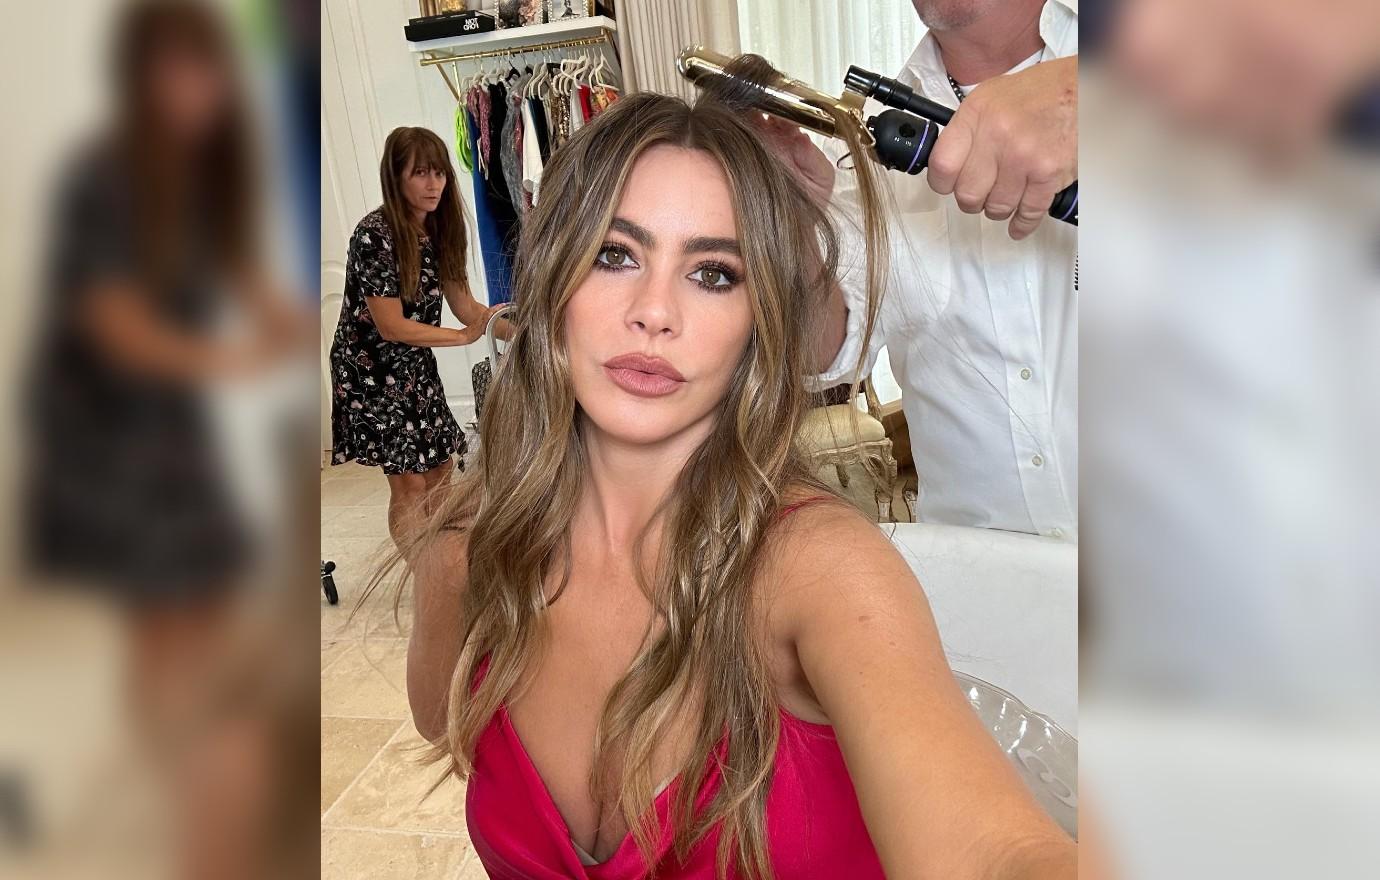 Sofia Vergara accused of trying to make ex Joe Manganiello 'jealous' in  sultry selfie with hunky man after he moves on